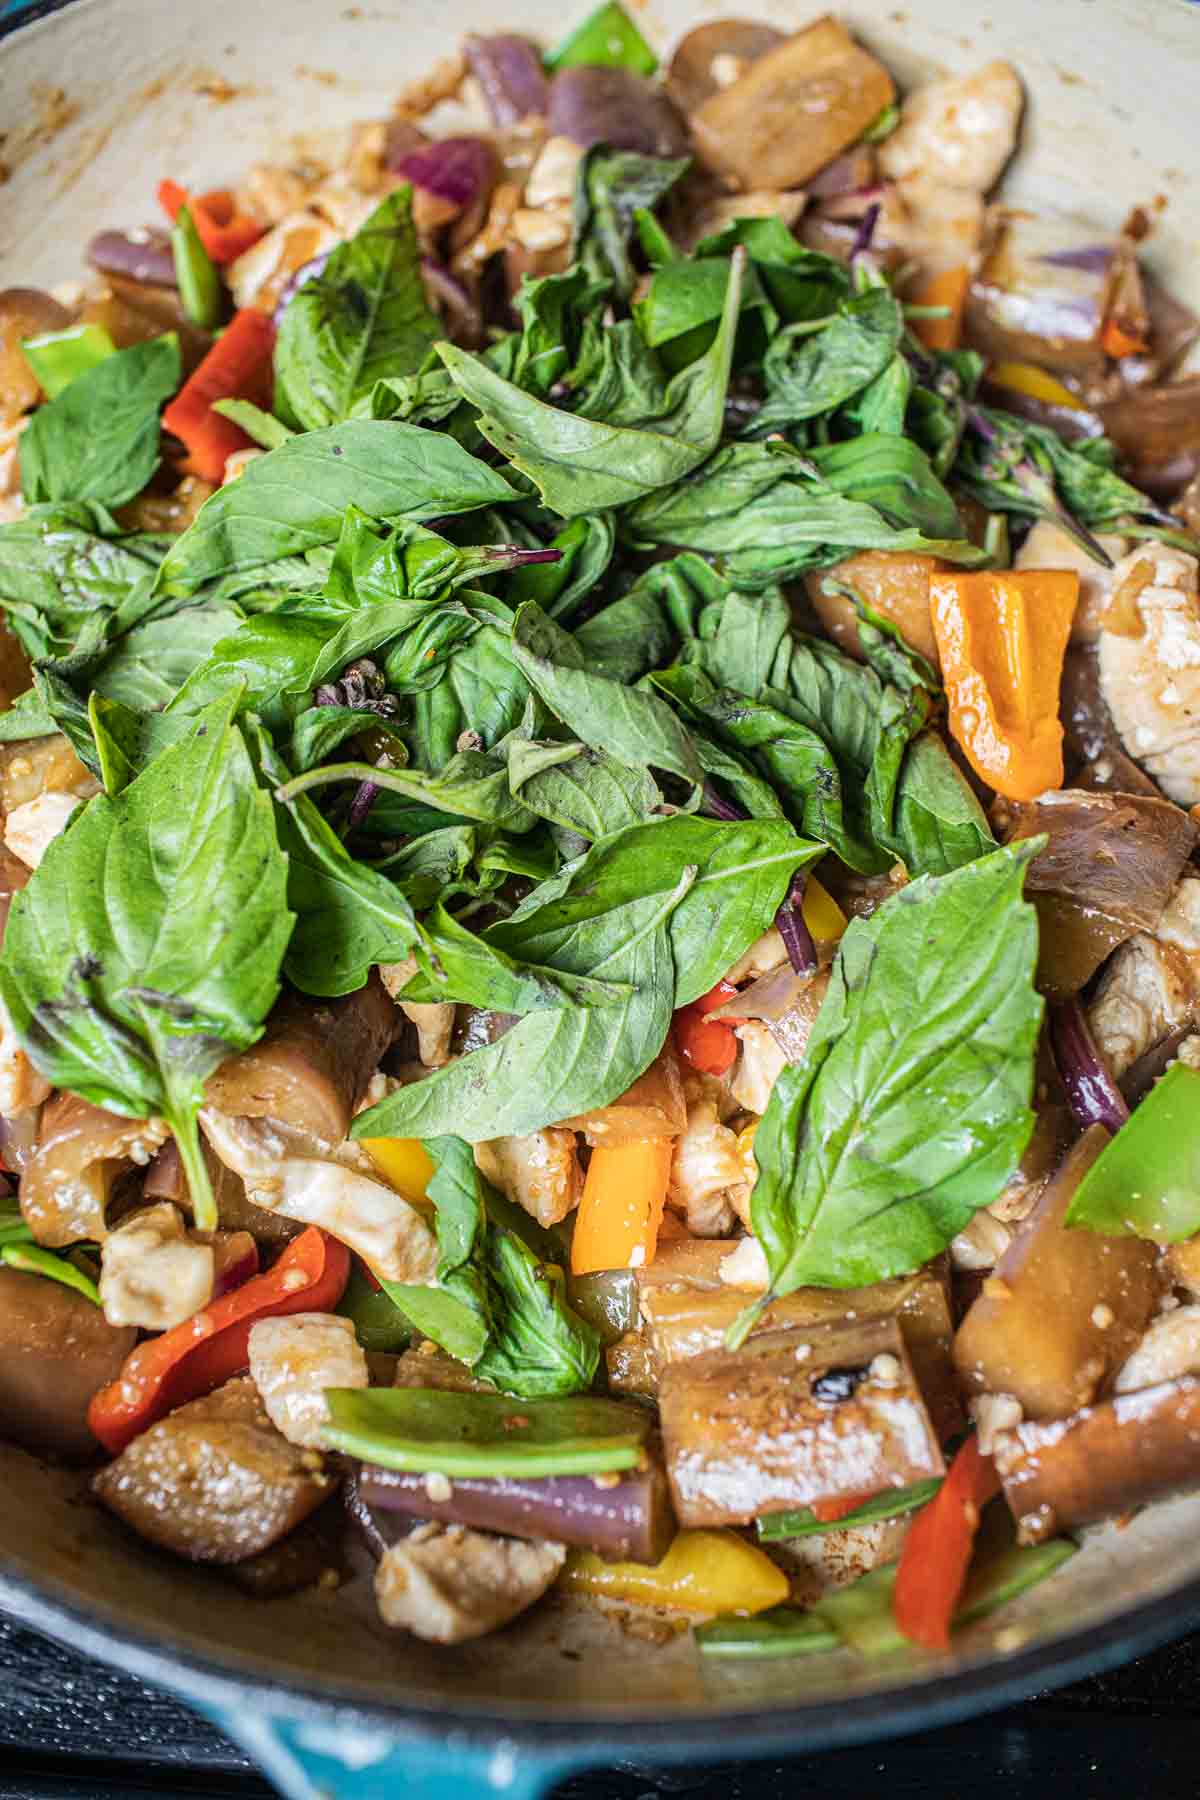 basil in a stir frying pan with eggplant and chicken